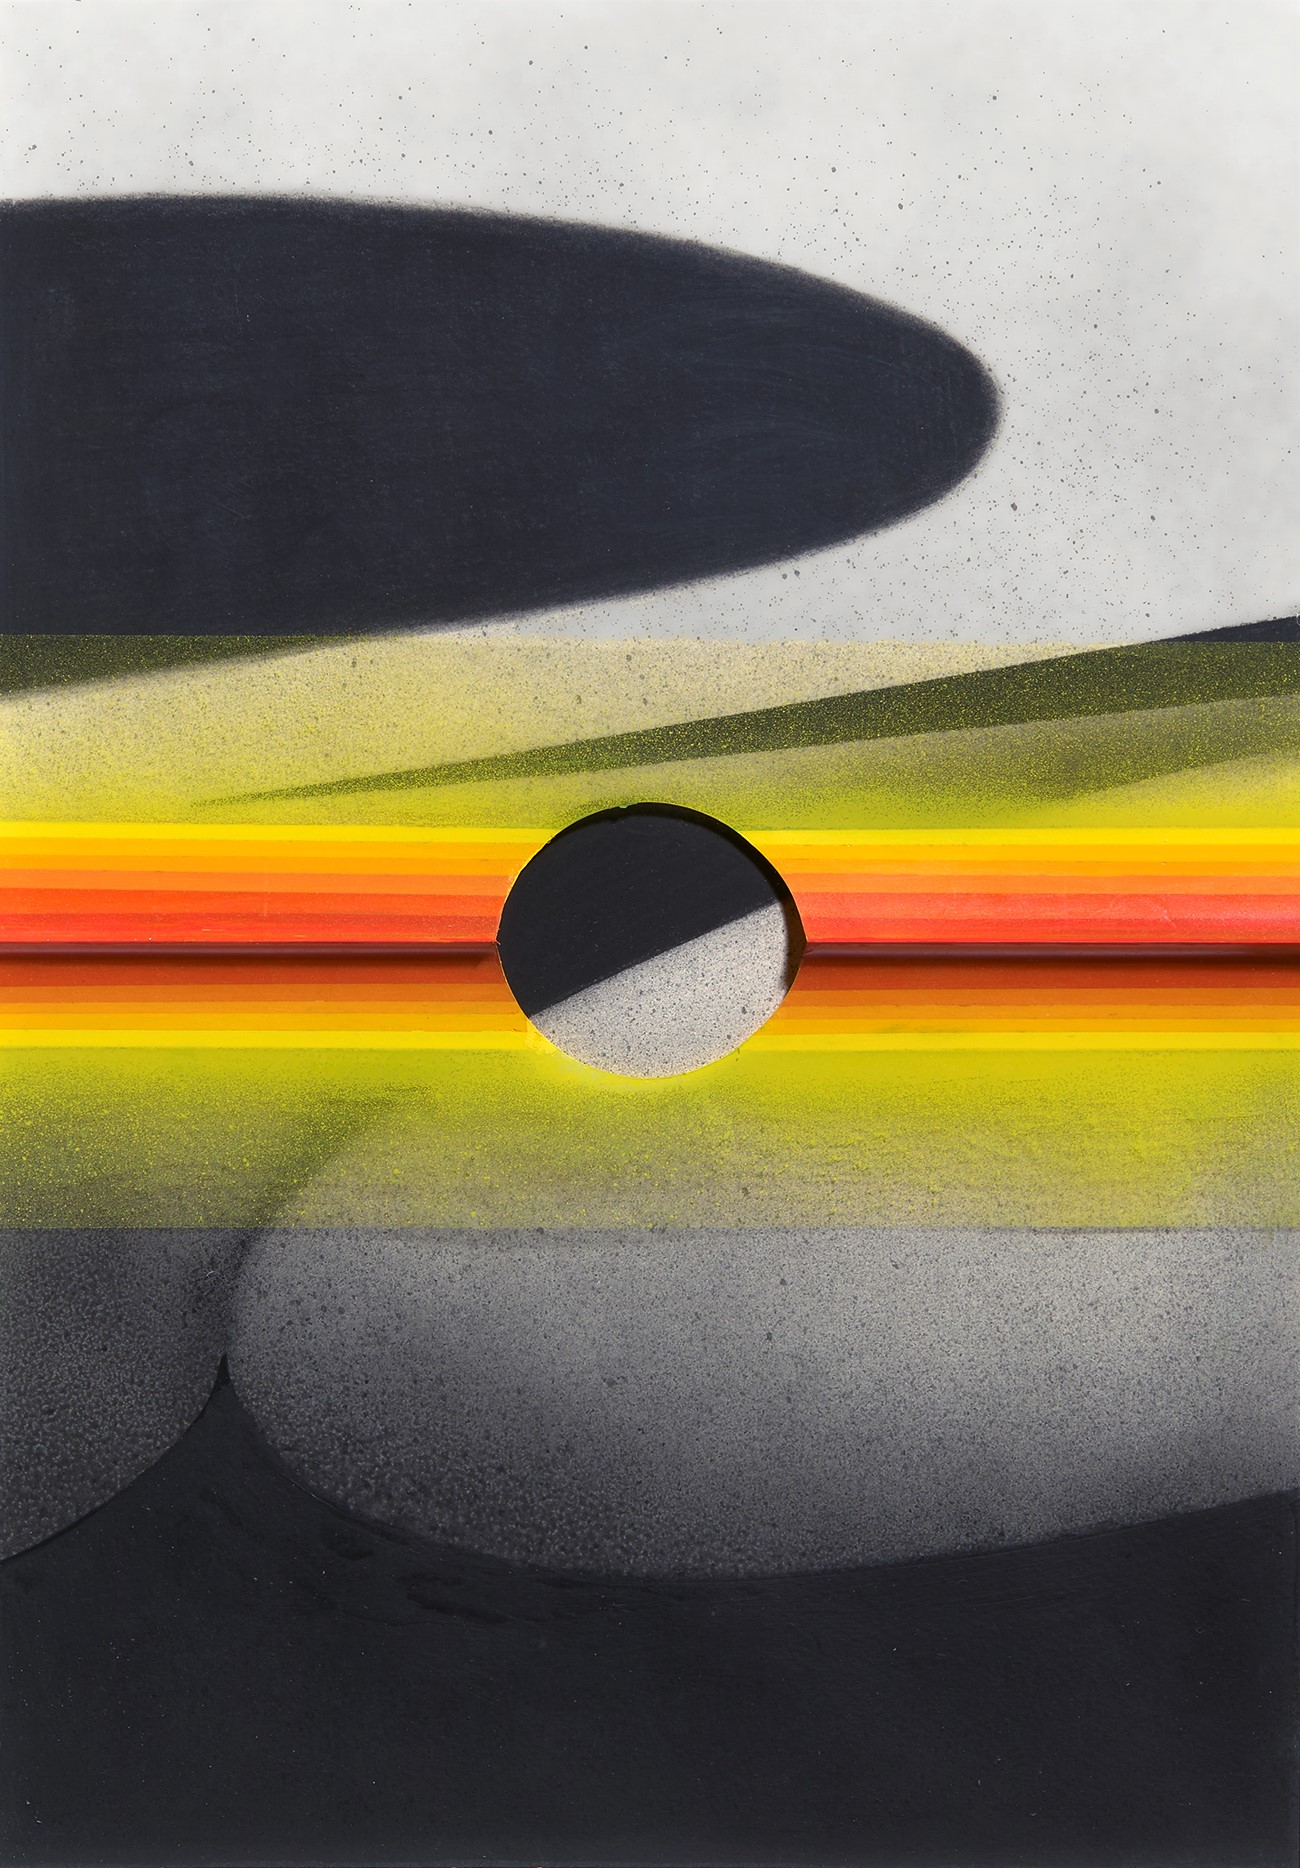 Mark Hislop 'Eclipse 1' graphite, charcoal, synthetic polymer paint, mylar, paper 48 x 34 cm $2,000